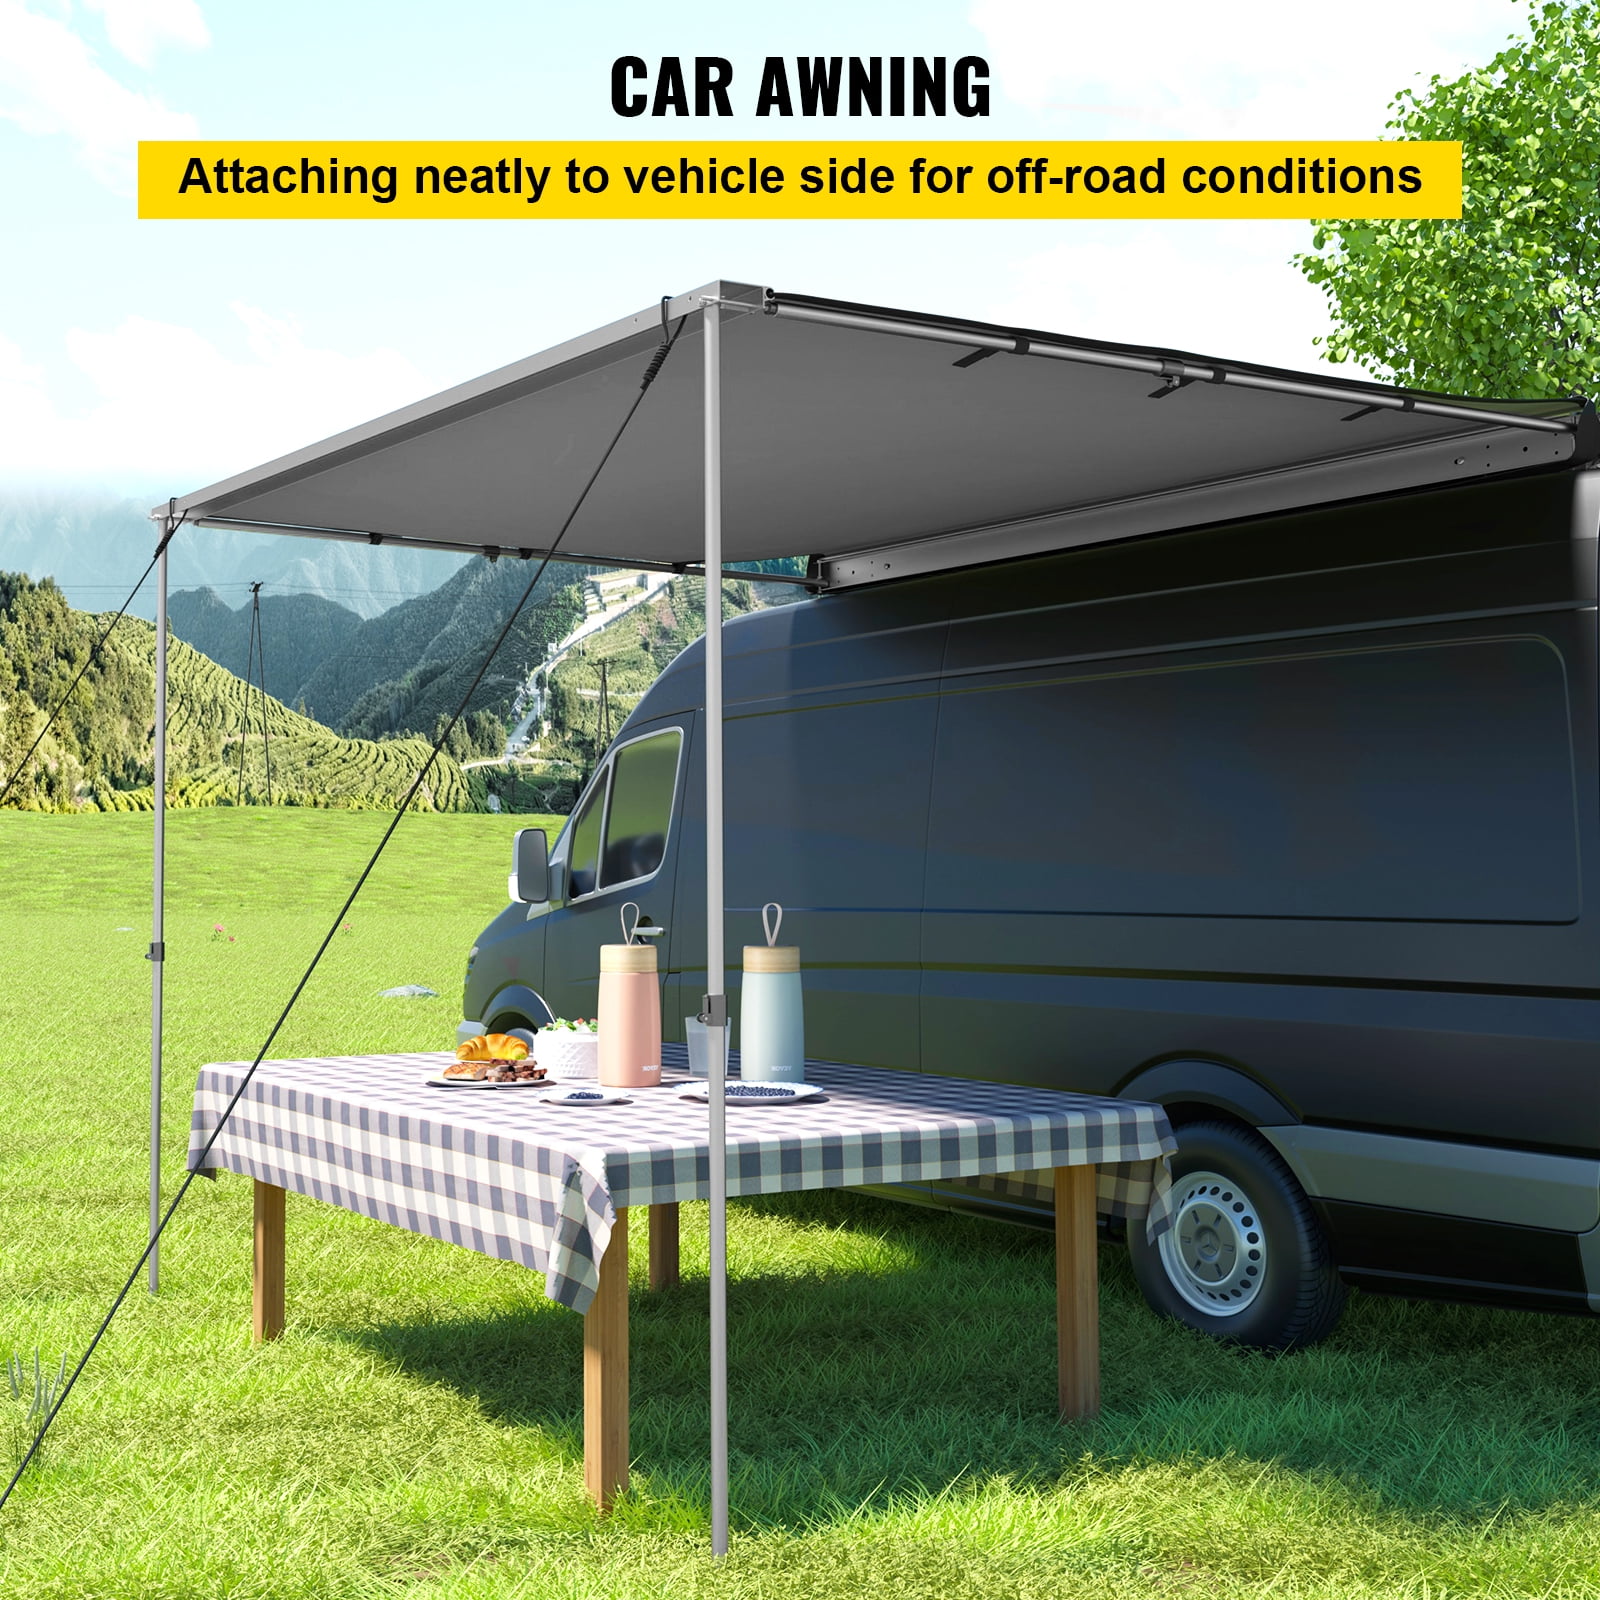 VEVOR Car Side Awning 5'x8.2' Telescoping Poles Trailer Sunshade Rooftop Tent w/ Carry Bag for Jeep/SUV/Truck/Van Outdoor Camping Travel Grey Pull-Out Retractable Vehicle Awning Waterproof UV50+ 